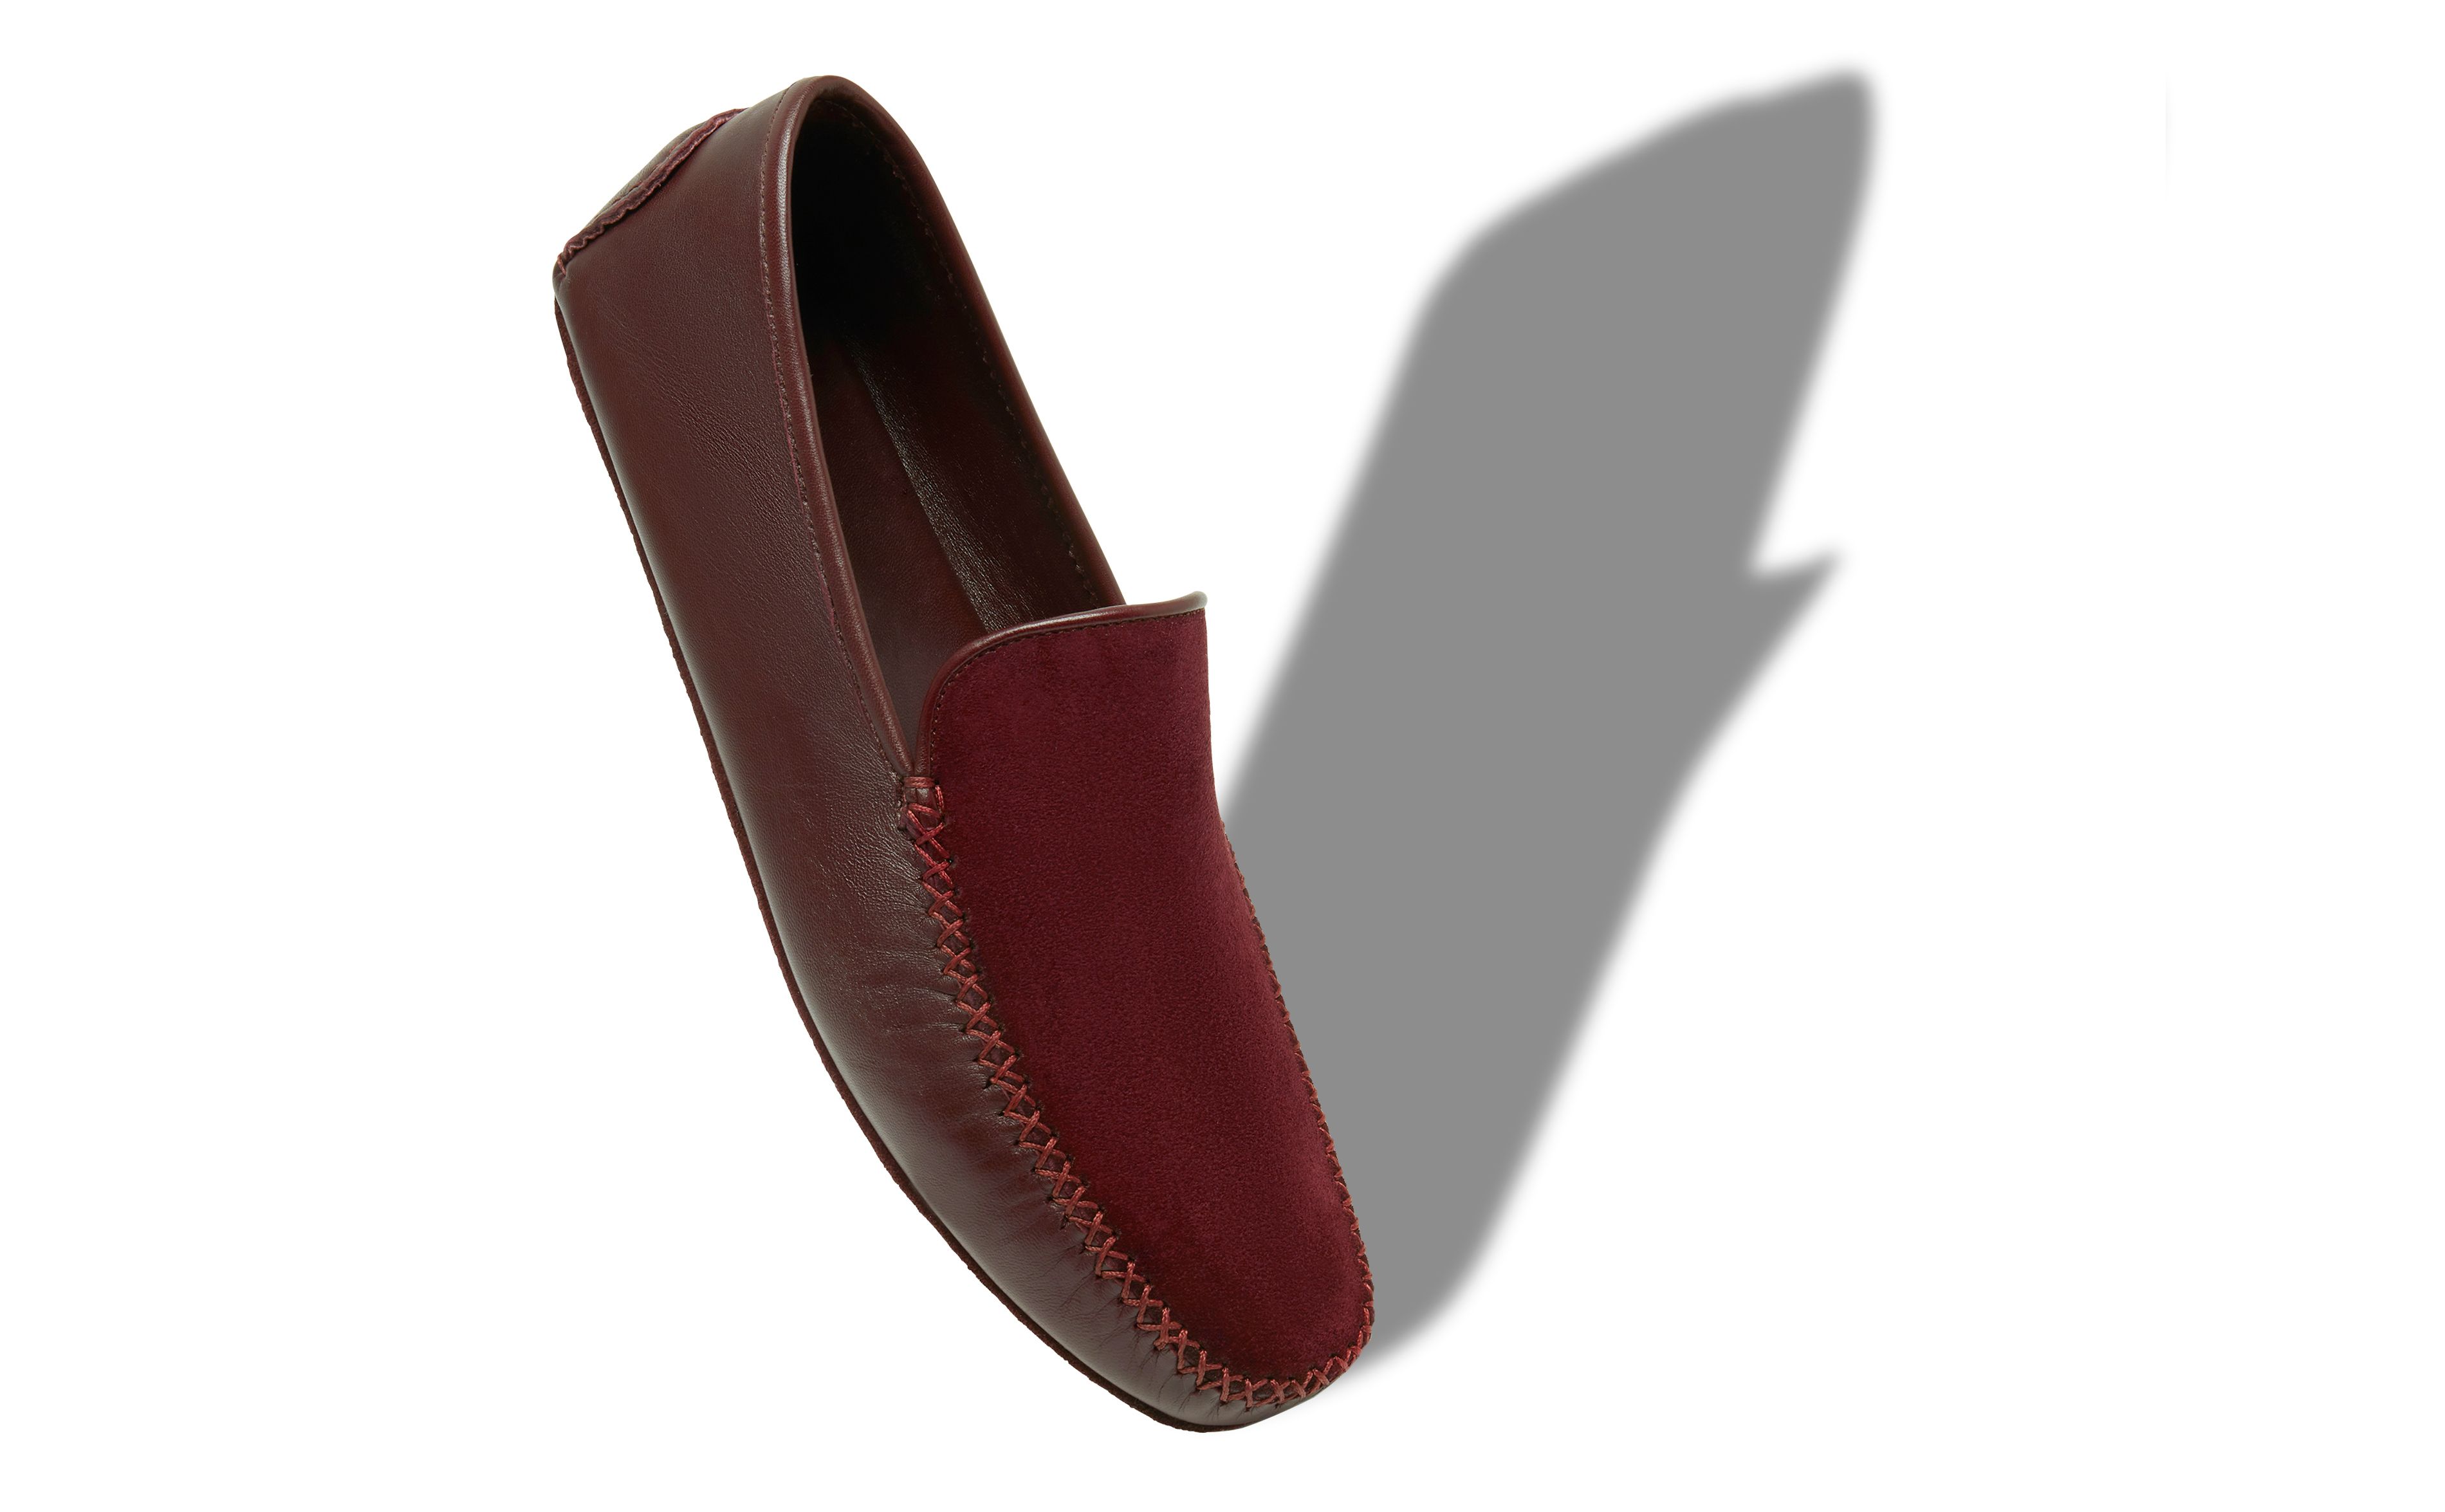 MAYFAIR | Burgundy Nappa Leather and Suede Driving Shoes | Manolo 